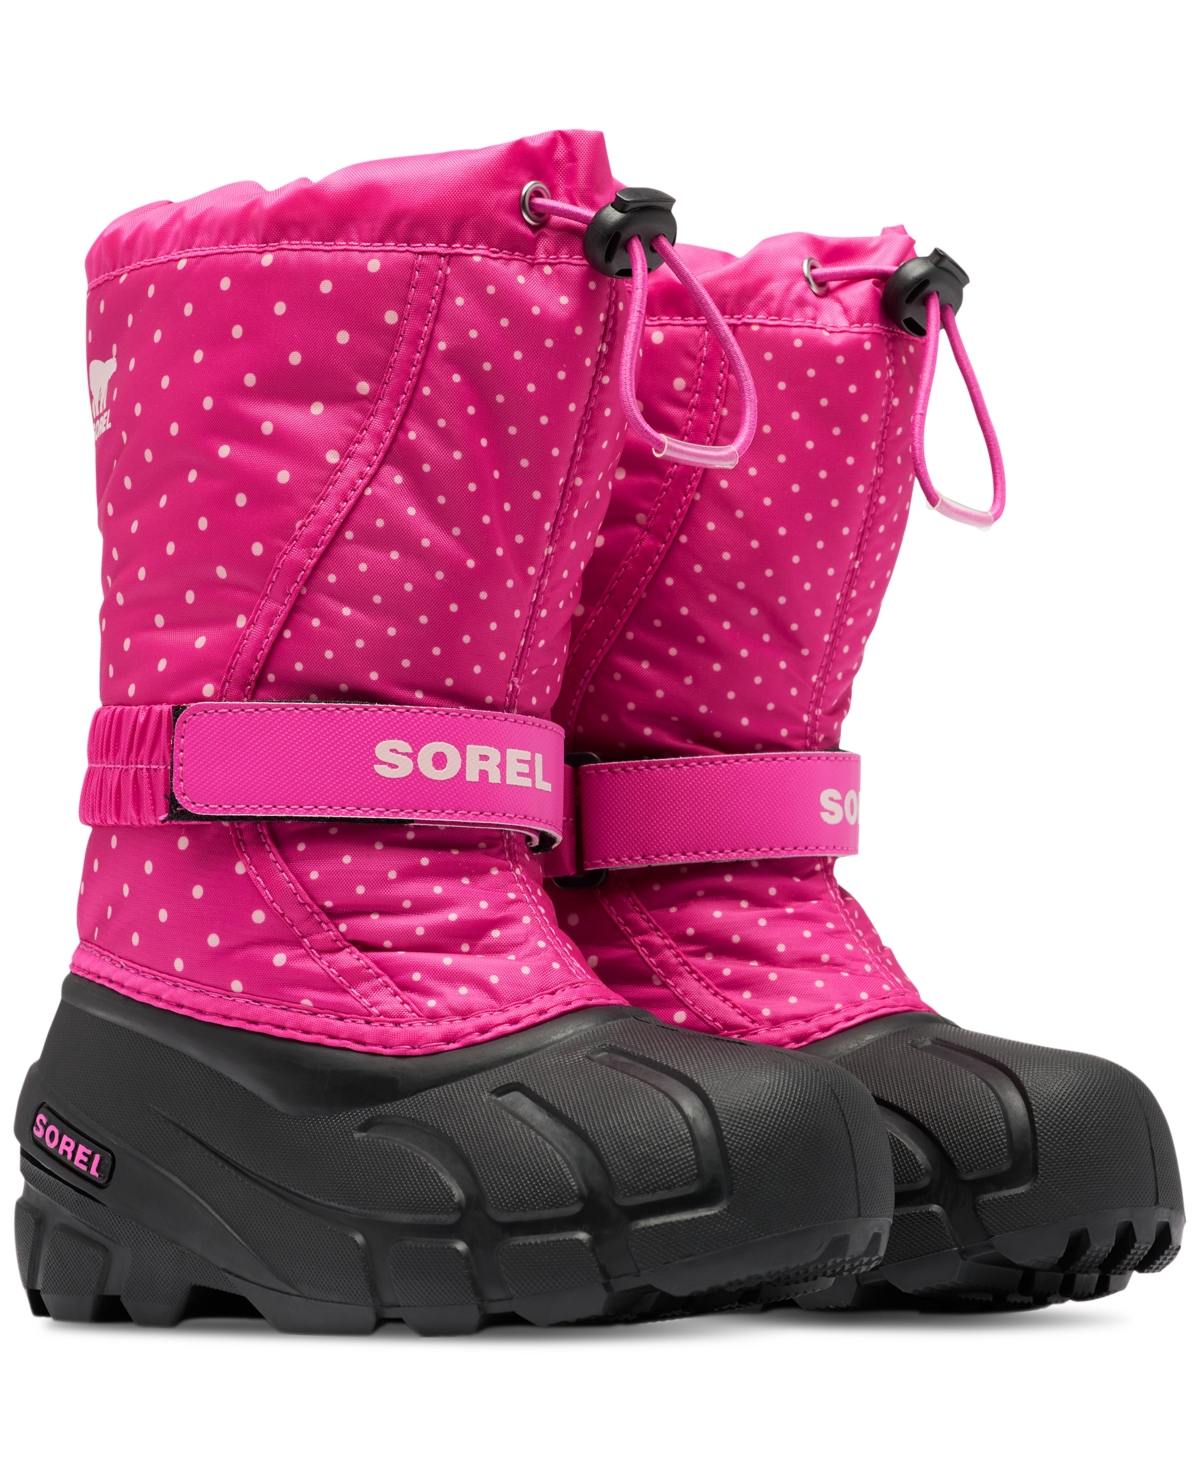 SOREL CHILDREN'S FLURRY PRINTED COLD-WEATHER BOOTS